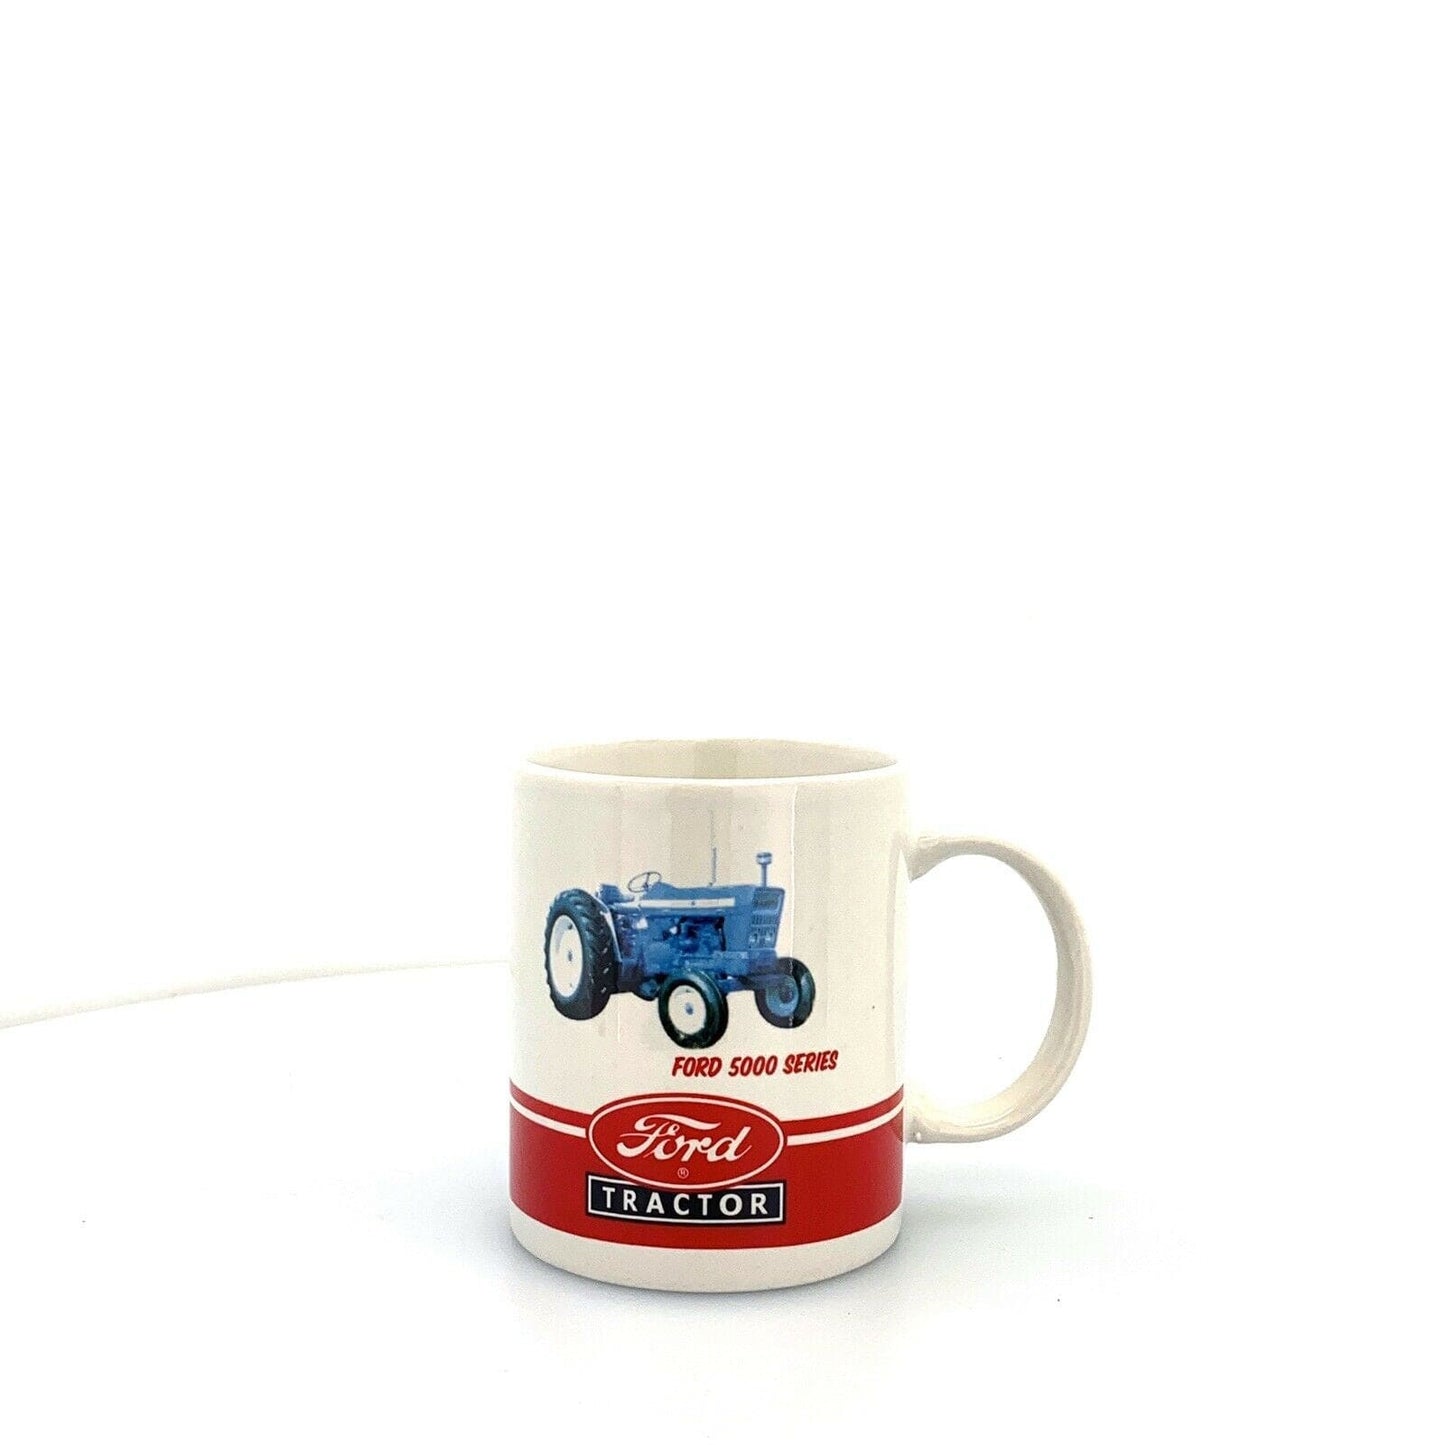 Ford 5000 Series Tractor Farmer Coffee Mug Official Ford Licensed, Microwavable